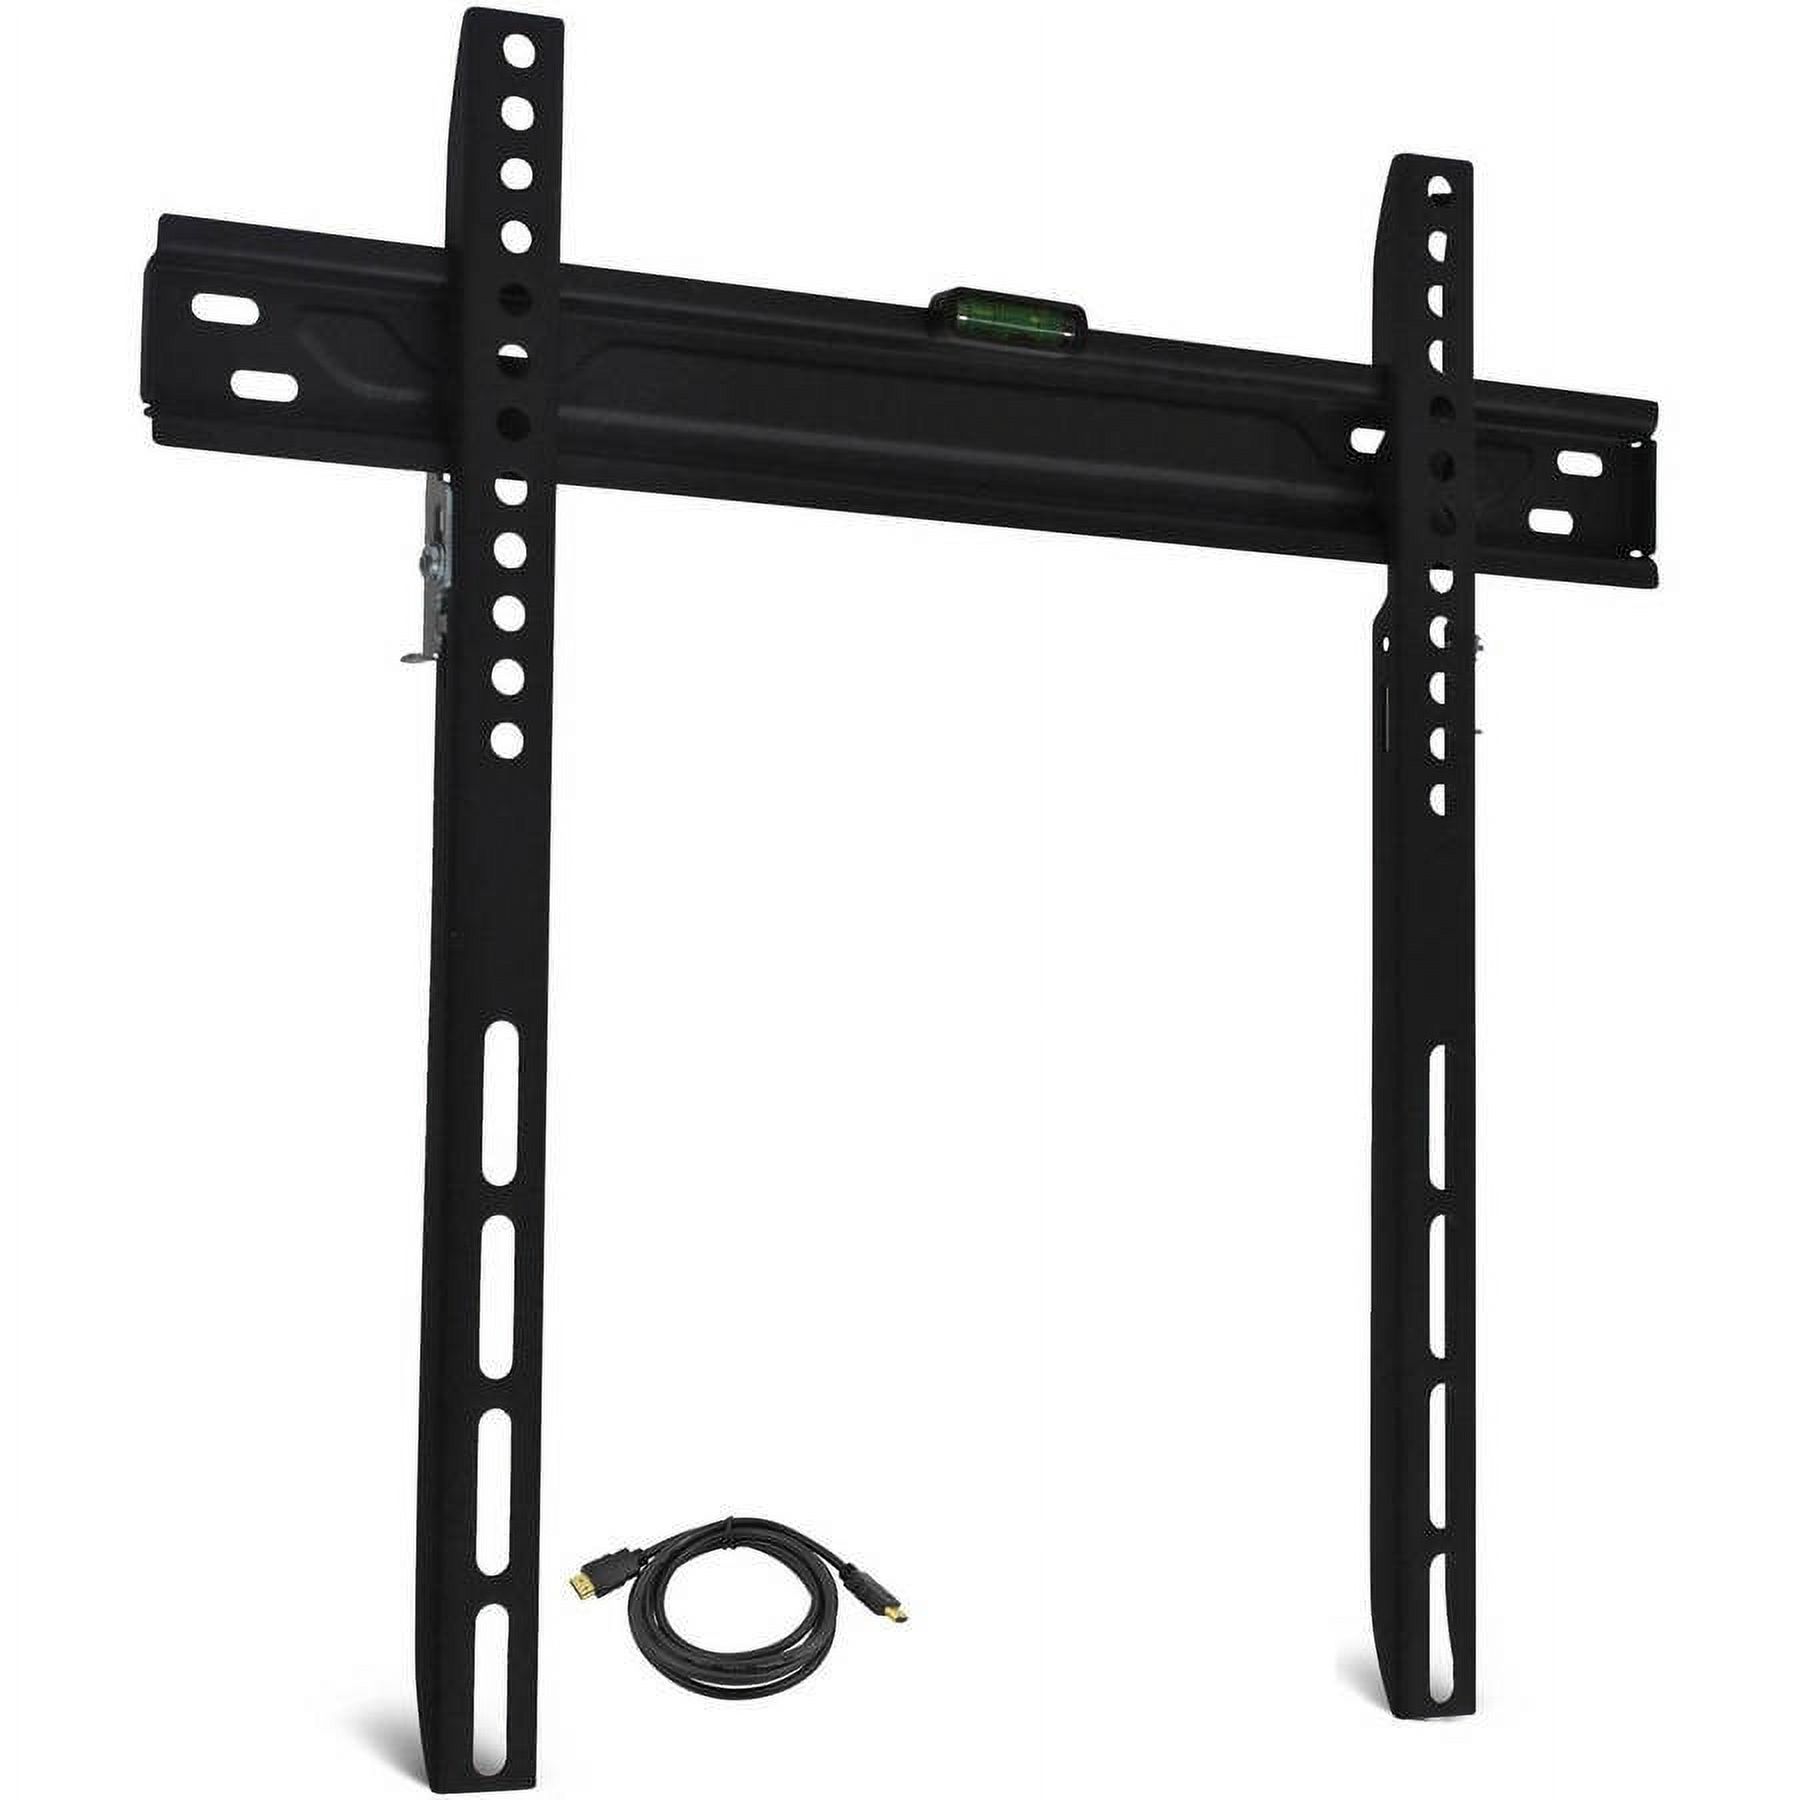 DuraPro Universal Low-Profile Wall Mount for 19" to 60" TVs + Bonus HDMI Cable (DRP650FD) - image 1 of 7